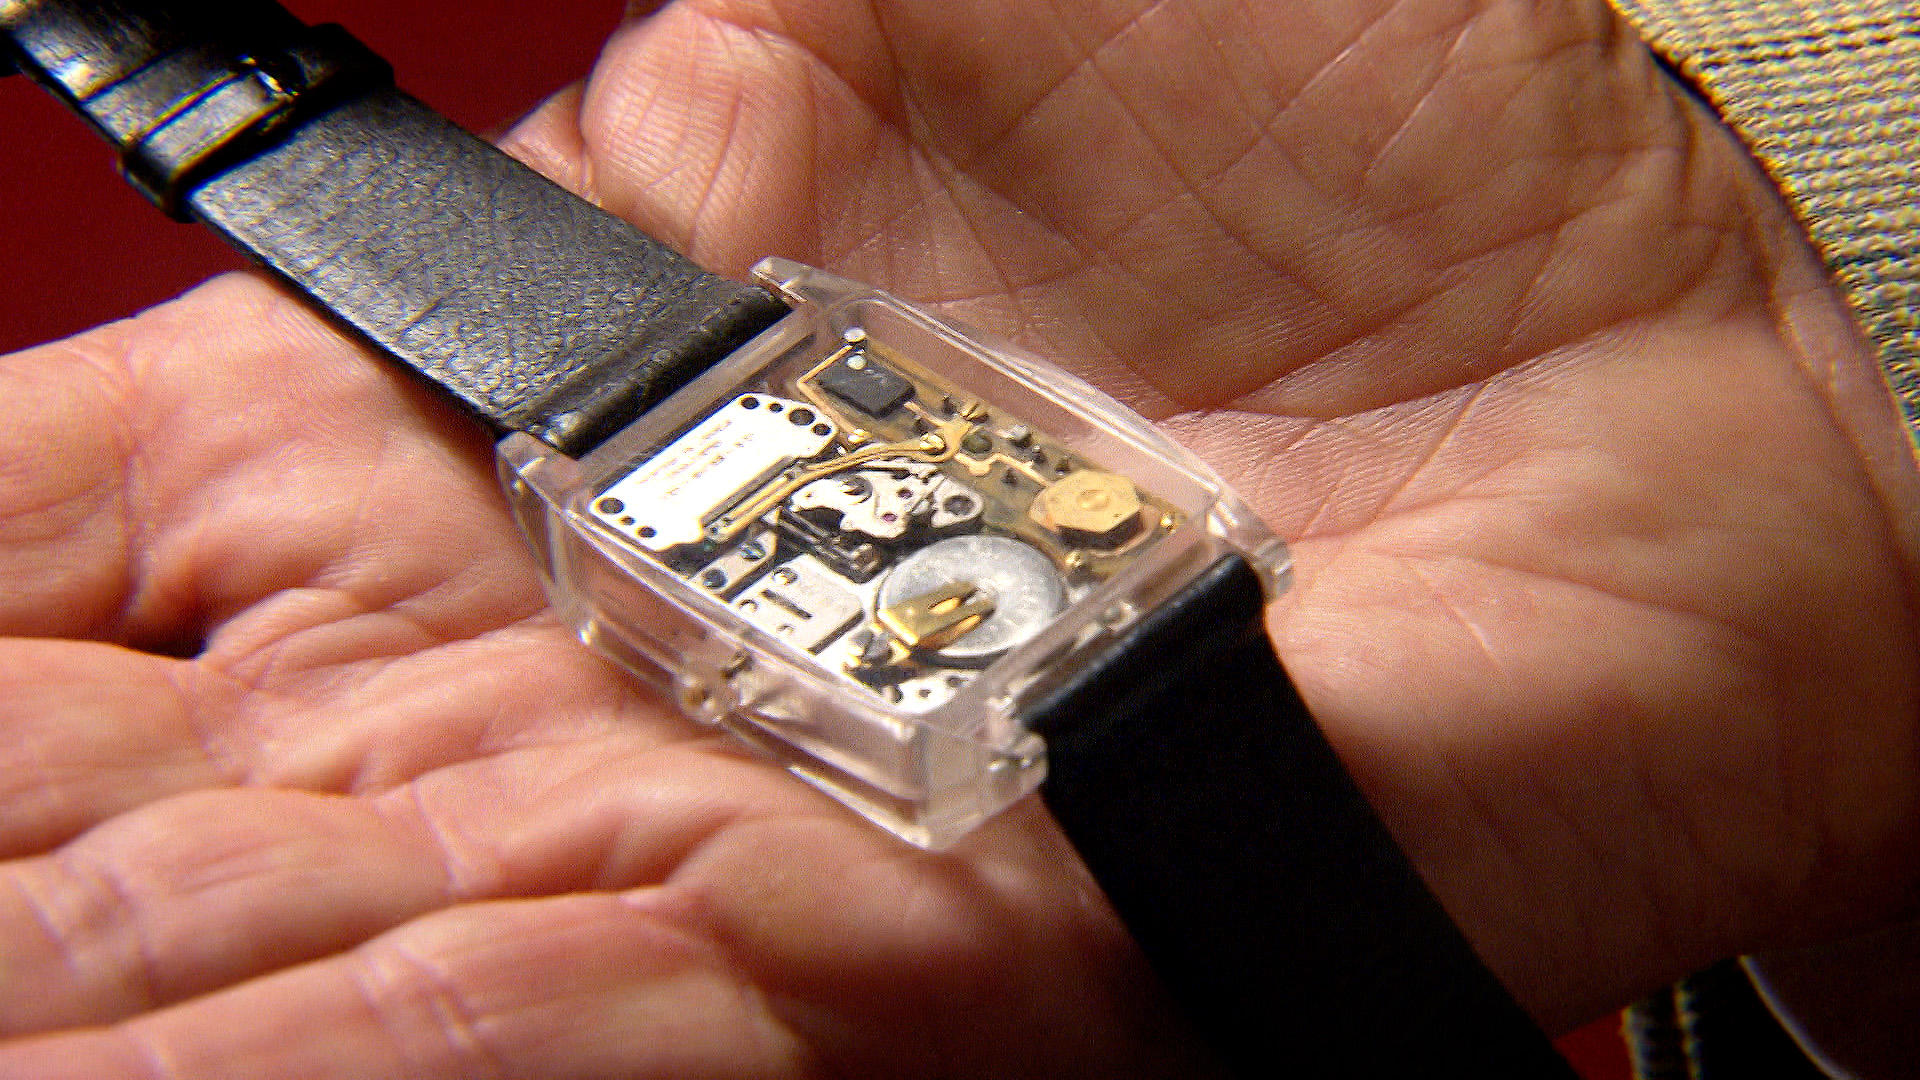 One of the first prototypes of quartz watches